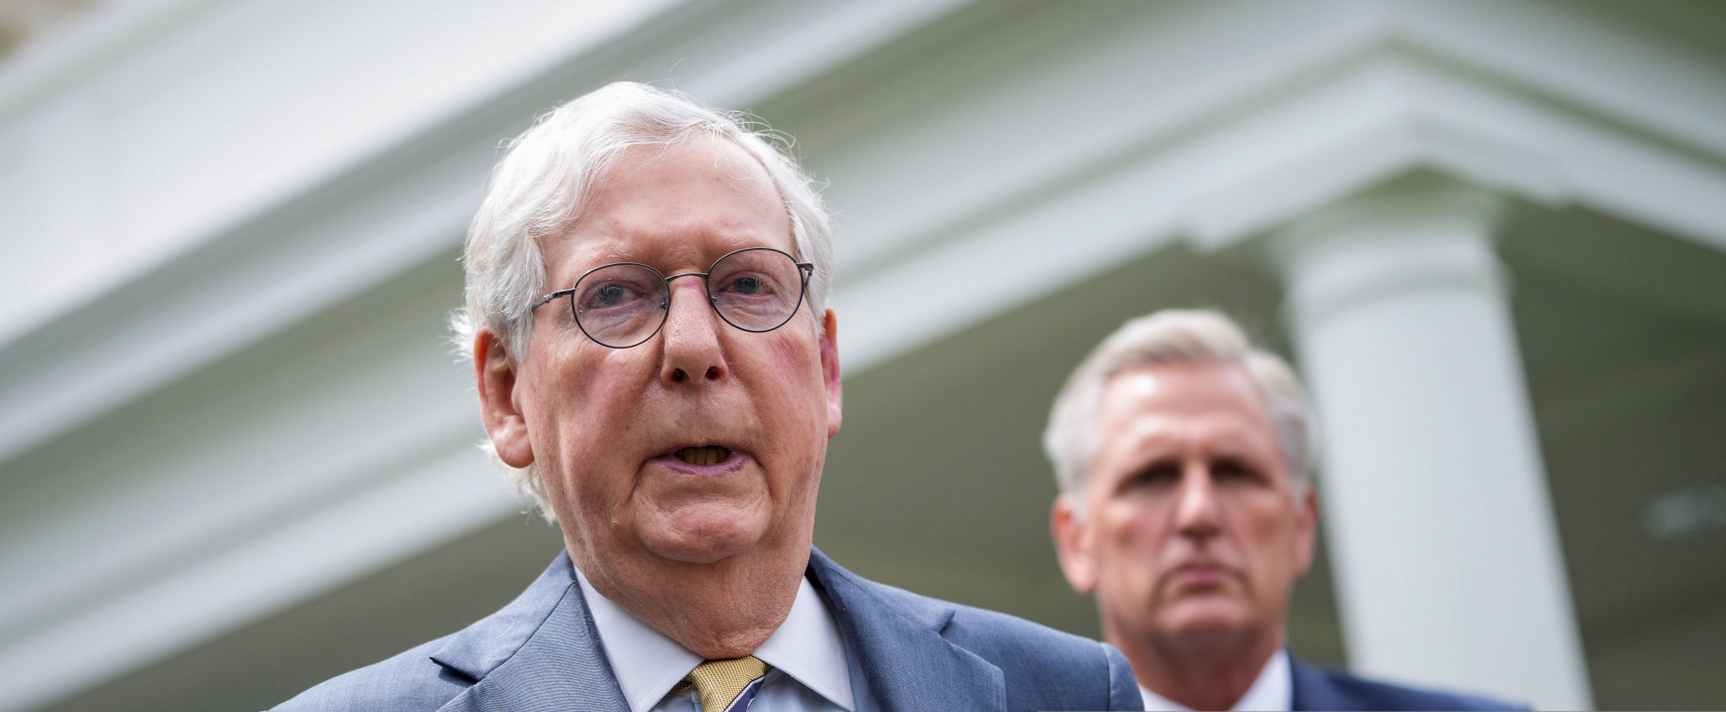 Senate Minority Leader Mitch McConnell (R-KY) and House Minority Leader Kevin McCarthy (R-CA) address reporters outside the White House after their Oval Office meeting with President Joe Biden on May 12, 2021 in Washington, DC.